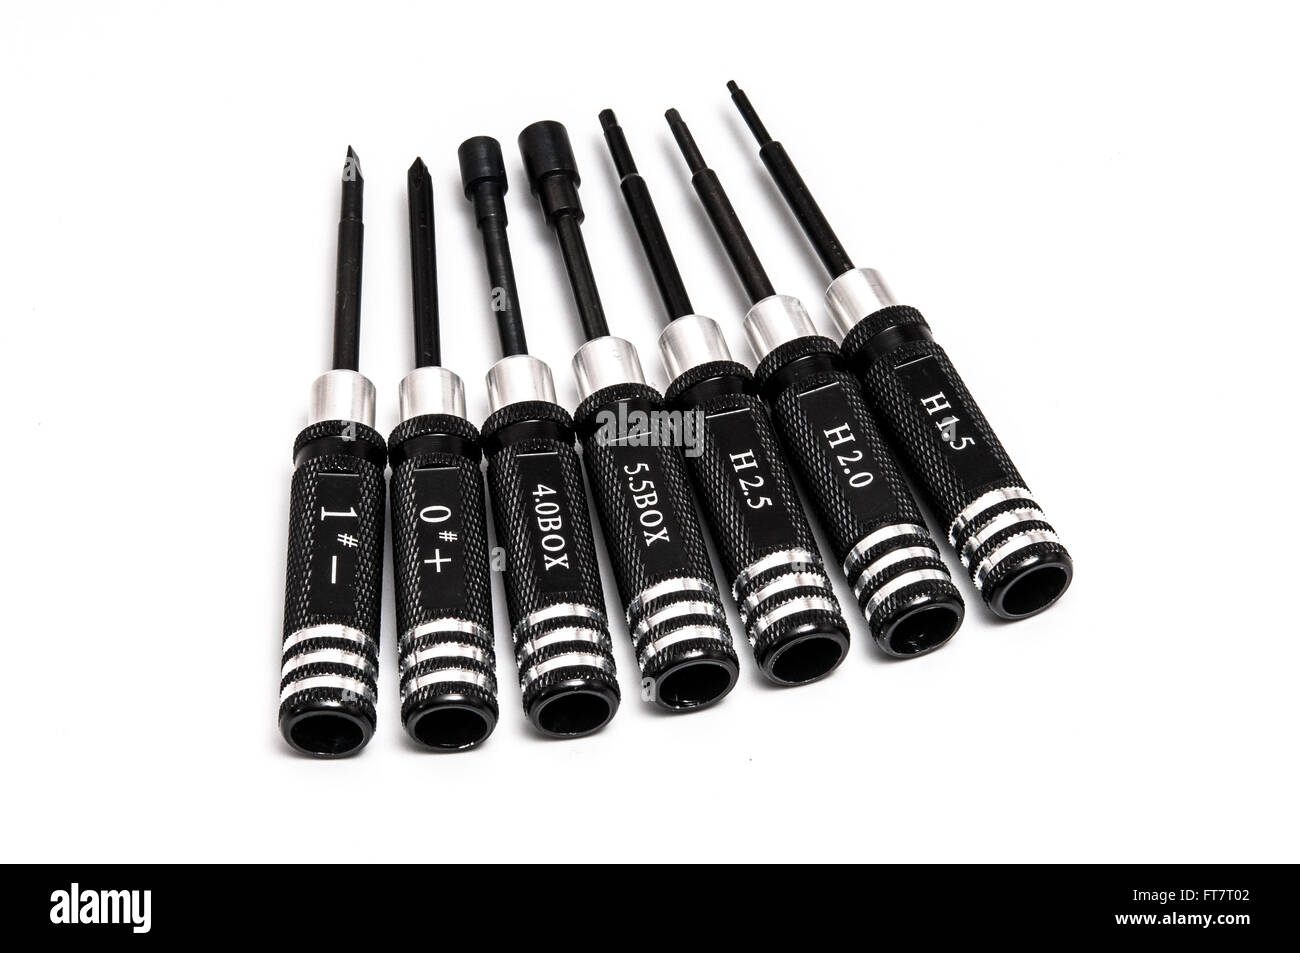 screwdriver set shapes and sizes Stock Photo